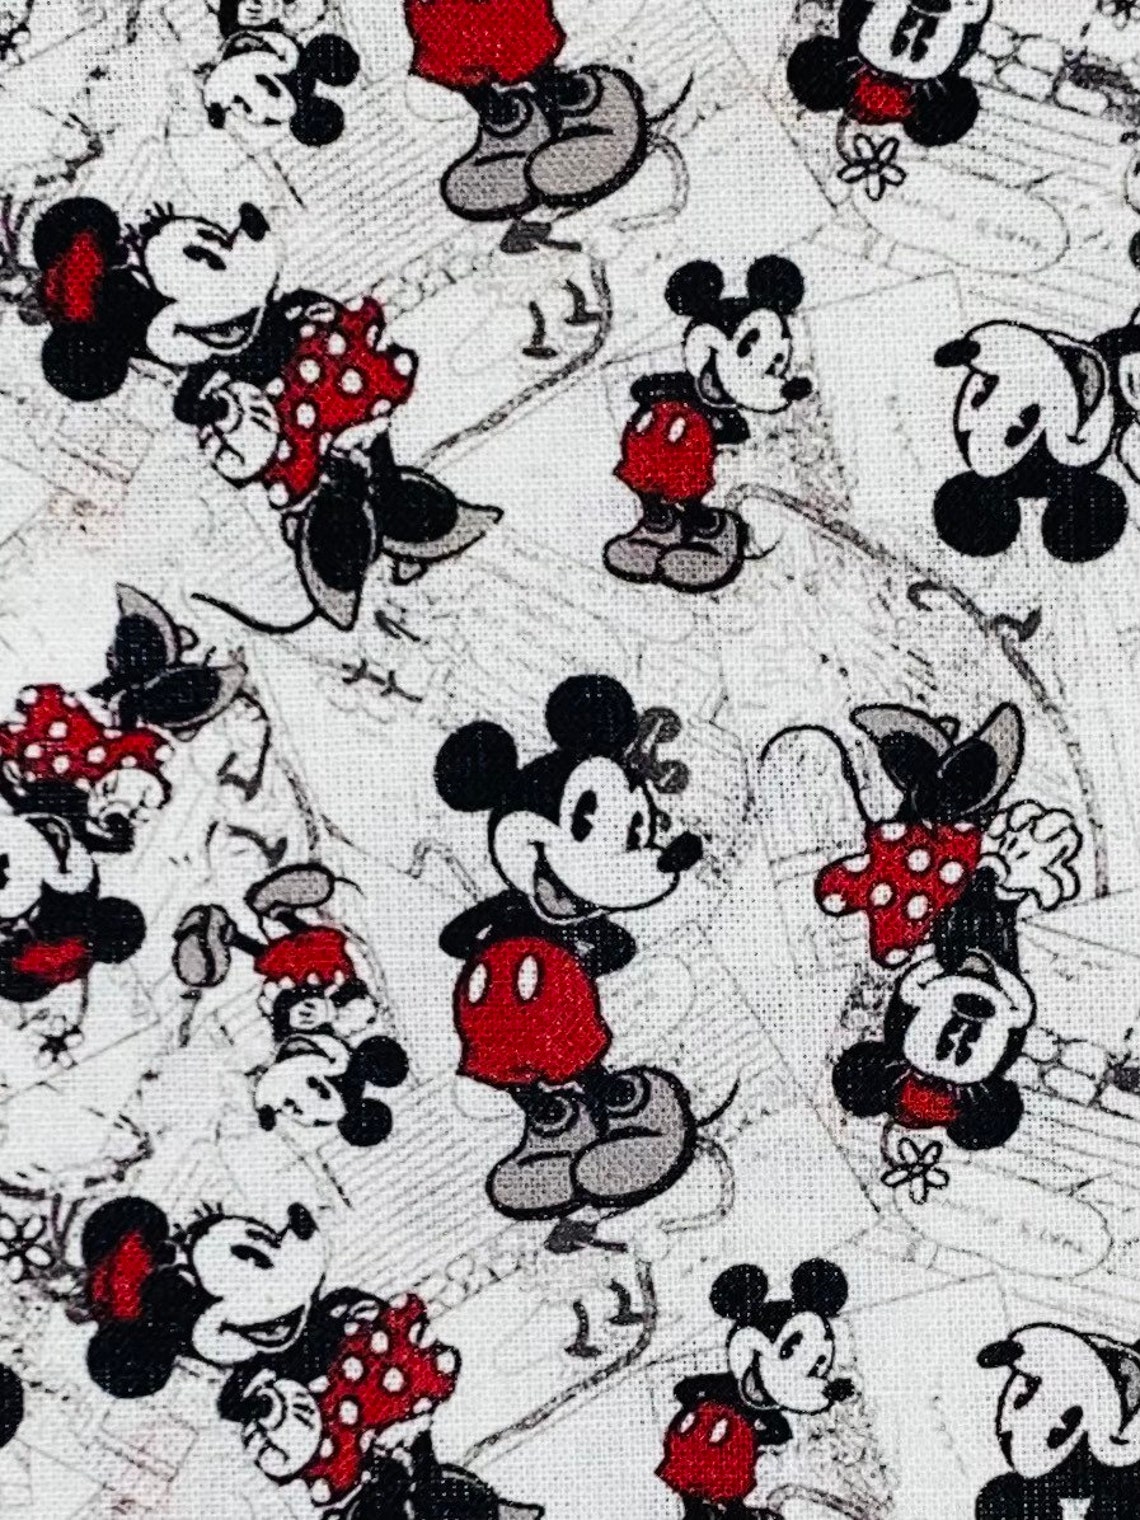 Mickey Mouse Minnie Mouse Fabric 100% Cotton Fabric by the - Etsy